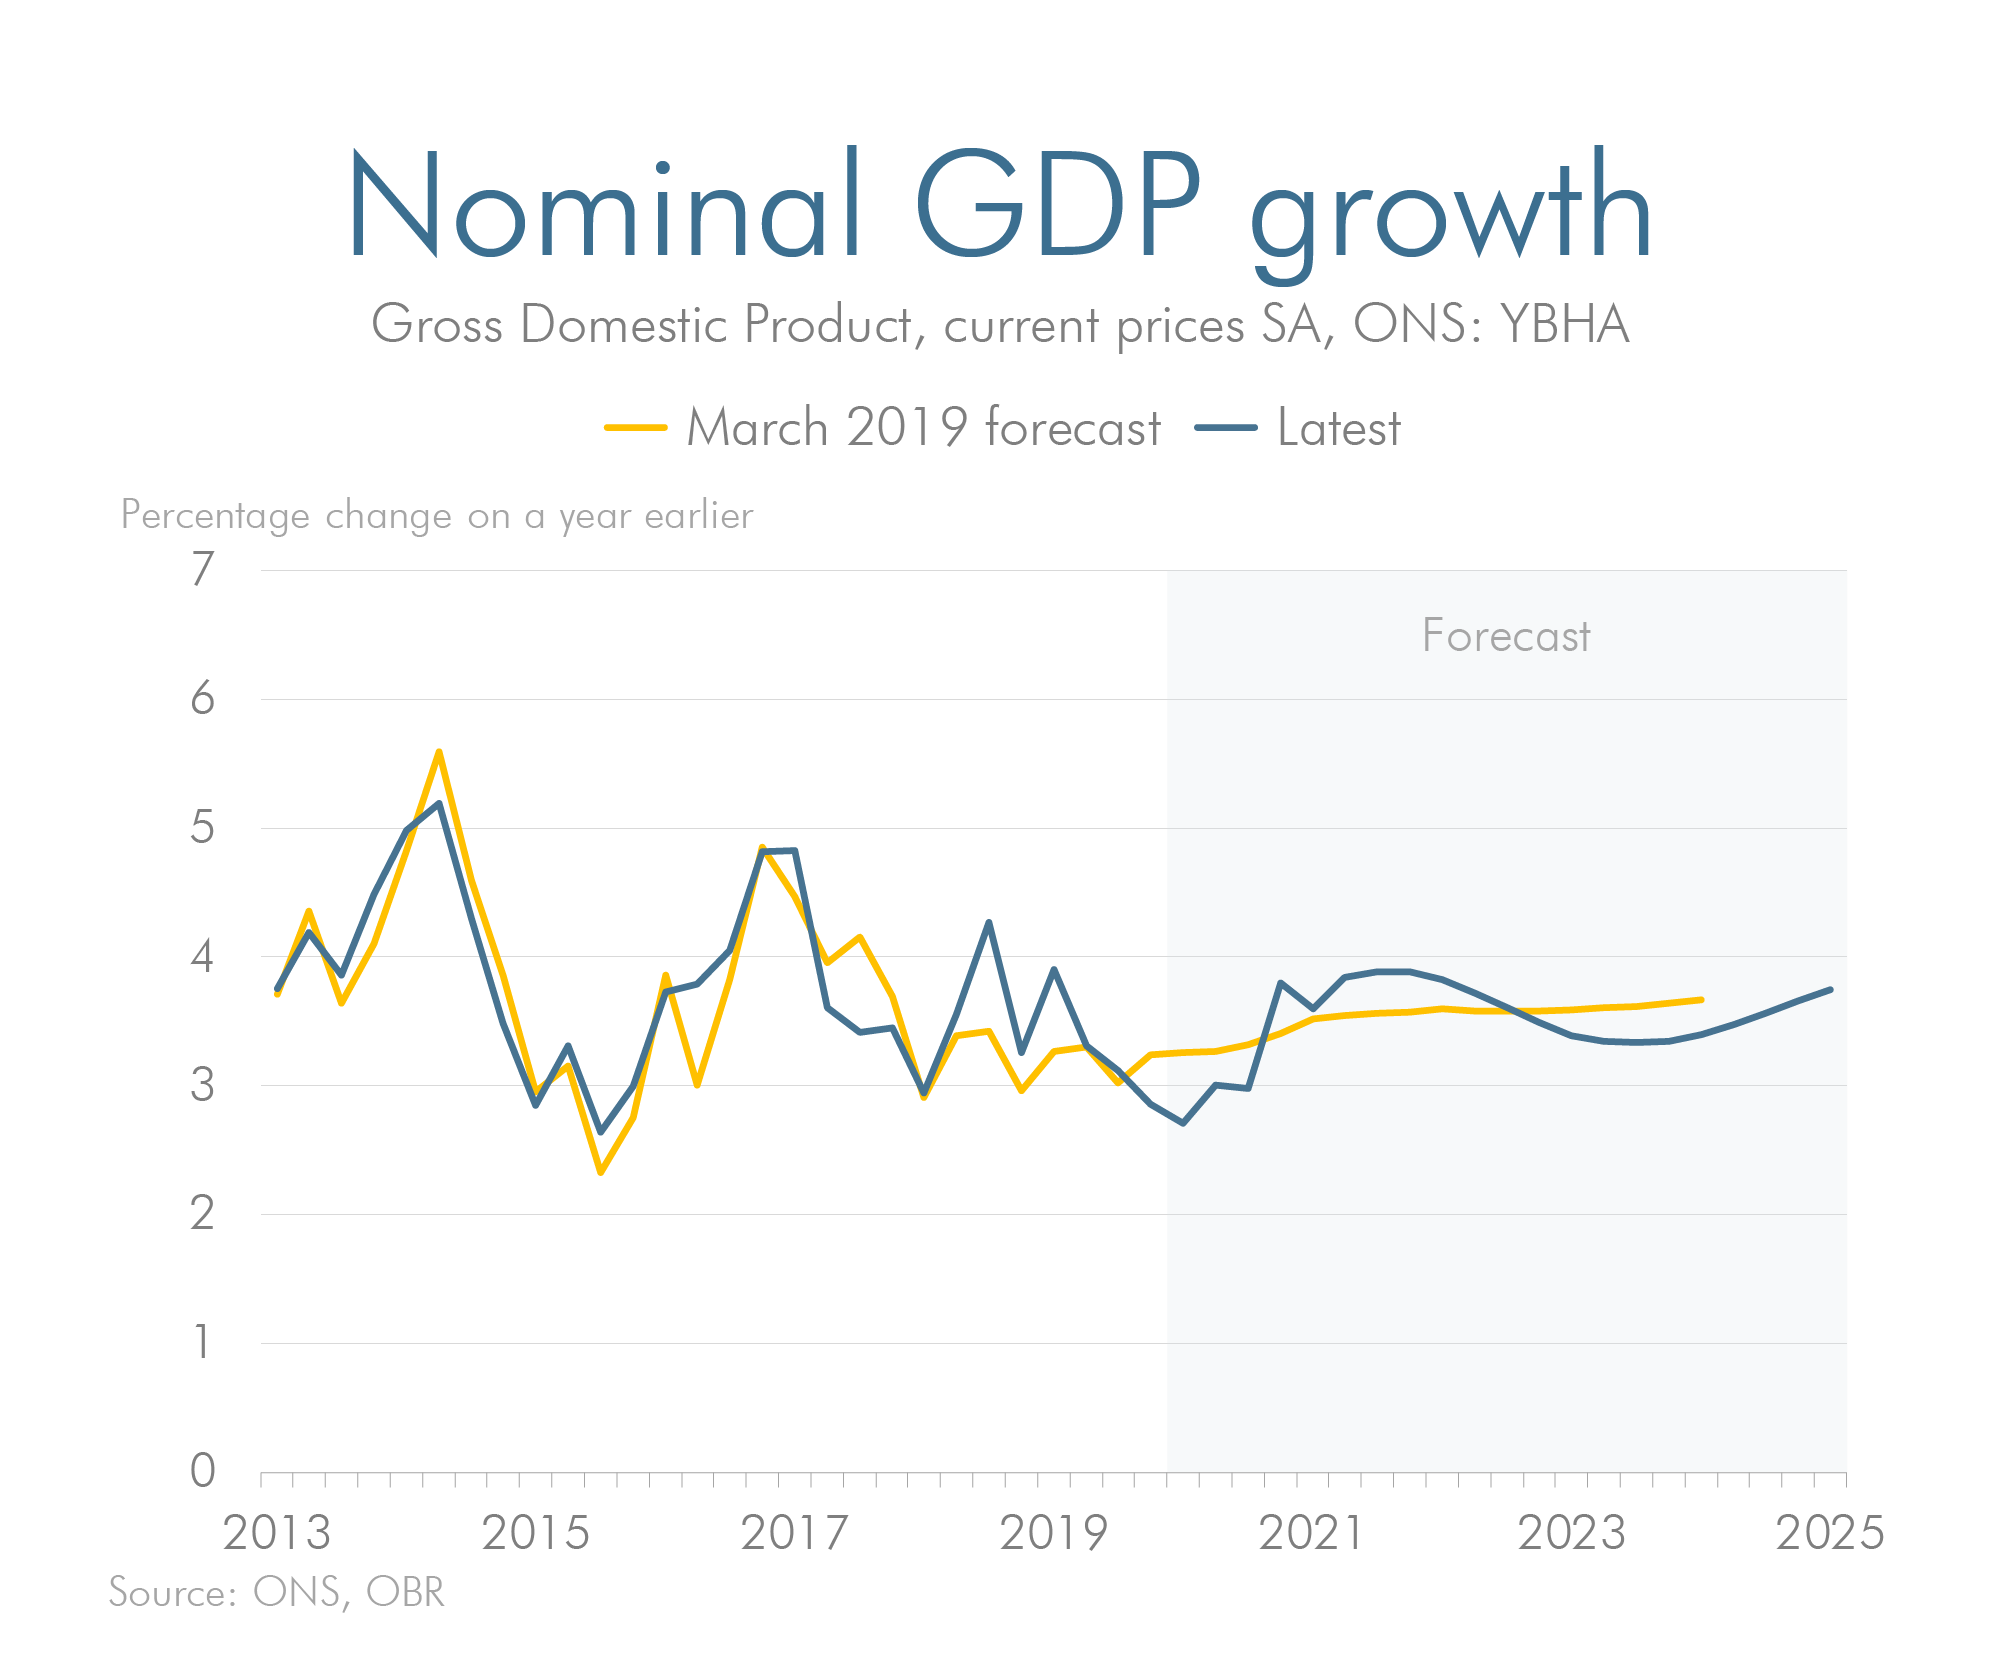 Latest forecast versus previous forecast for nominal GDP growth